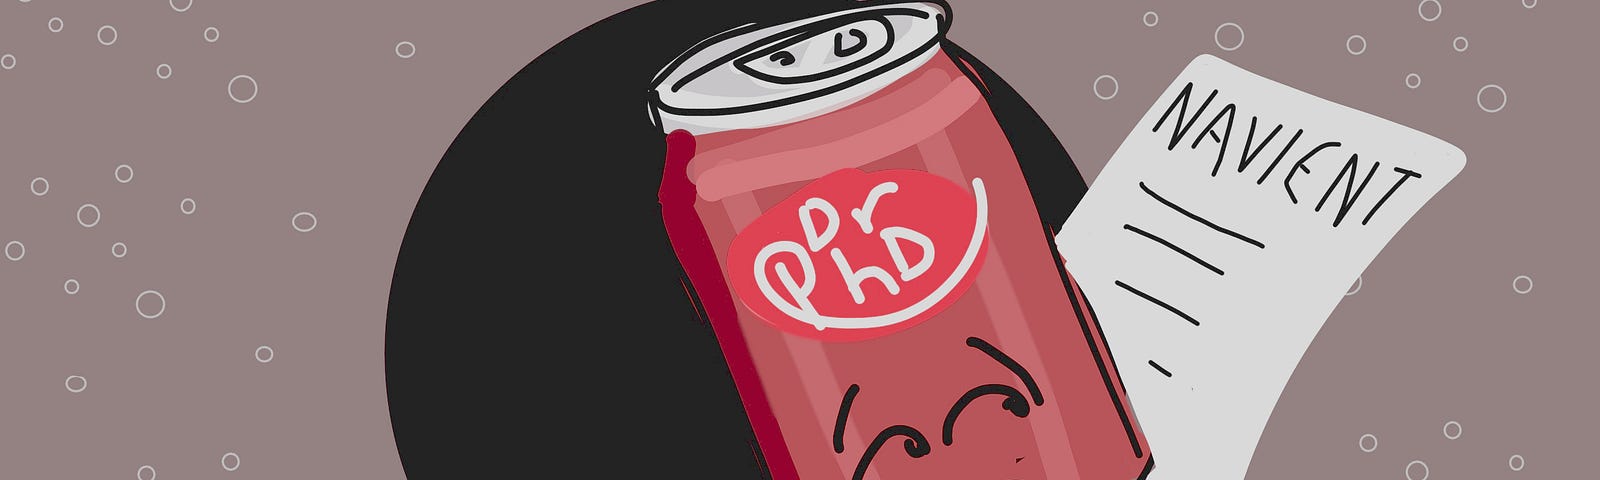 Sad Dr Pepper can holding student loan statement